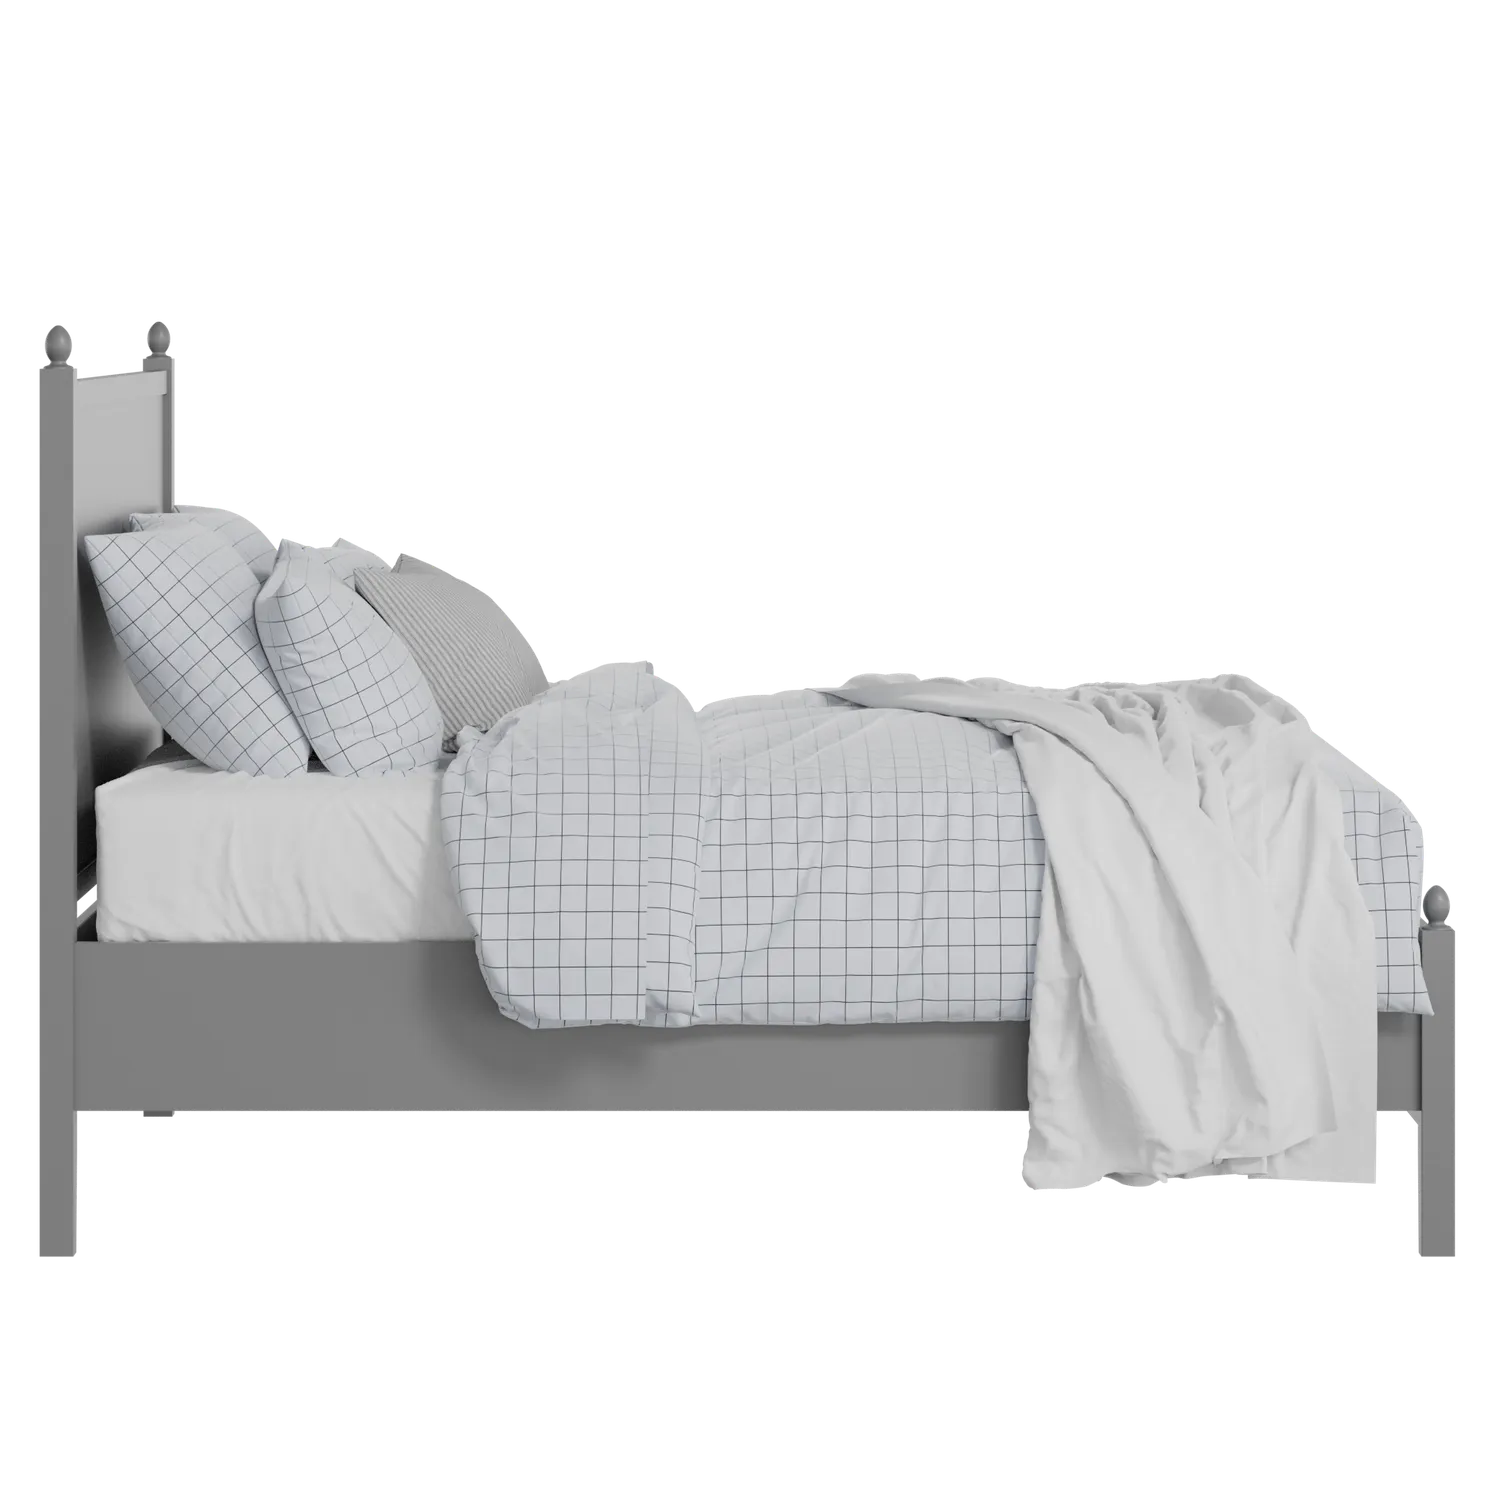 Marbella Slim painted wood bed in grey with Juno mattress